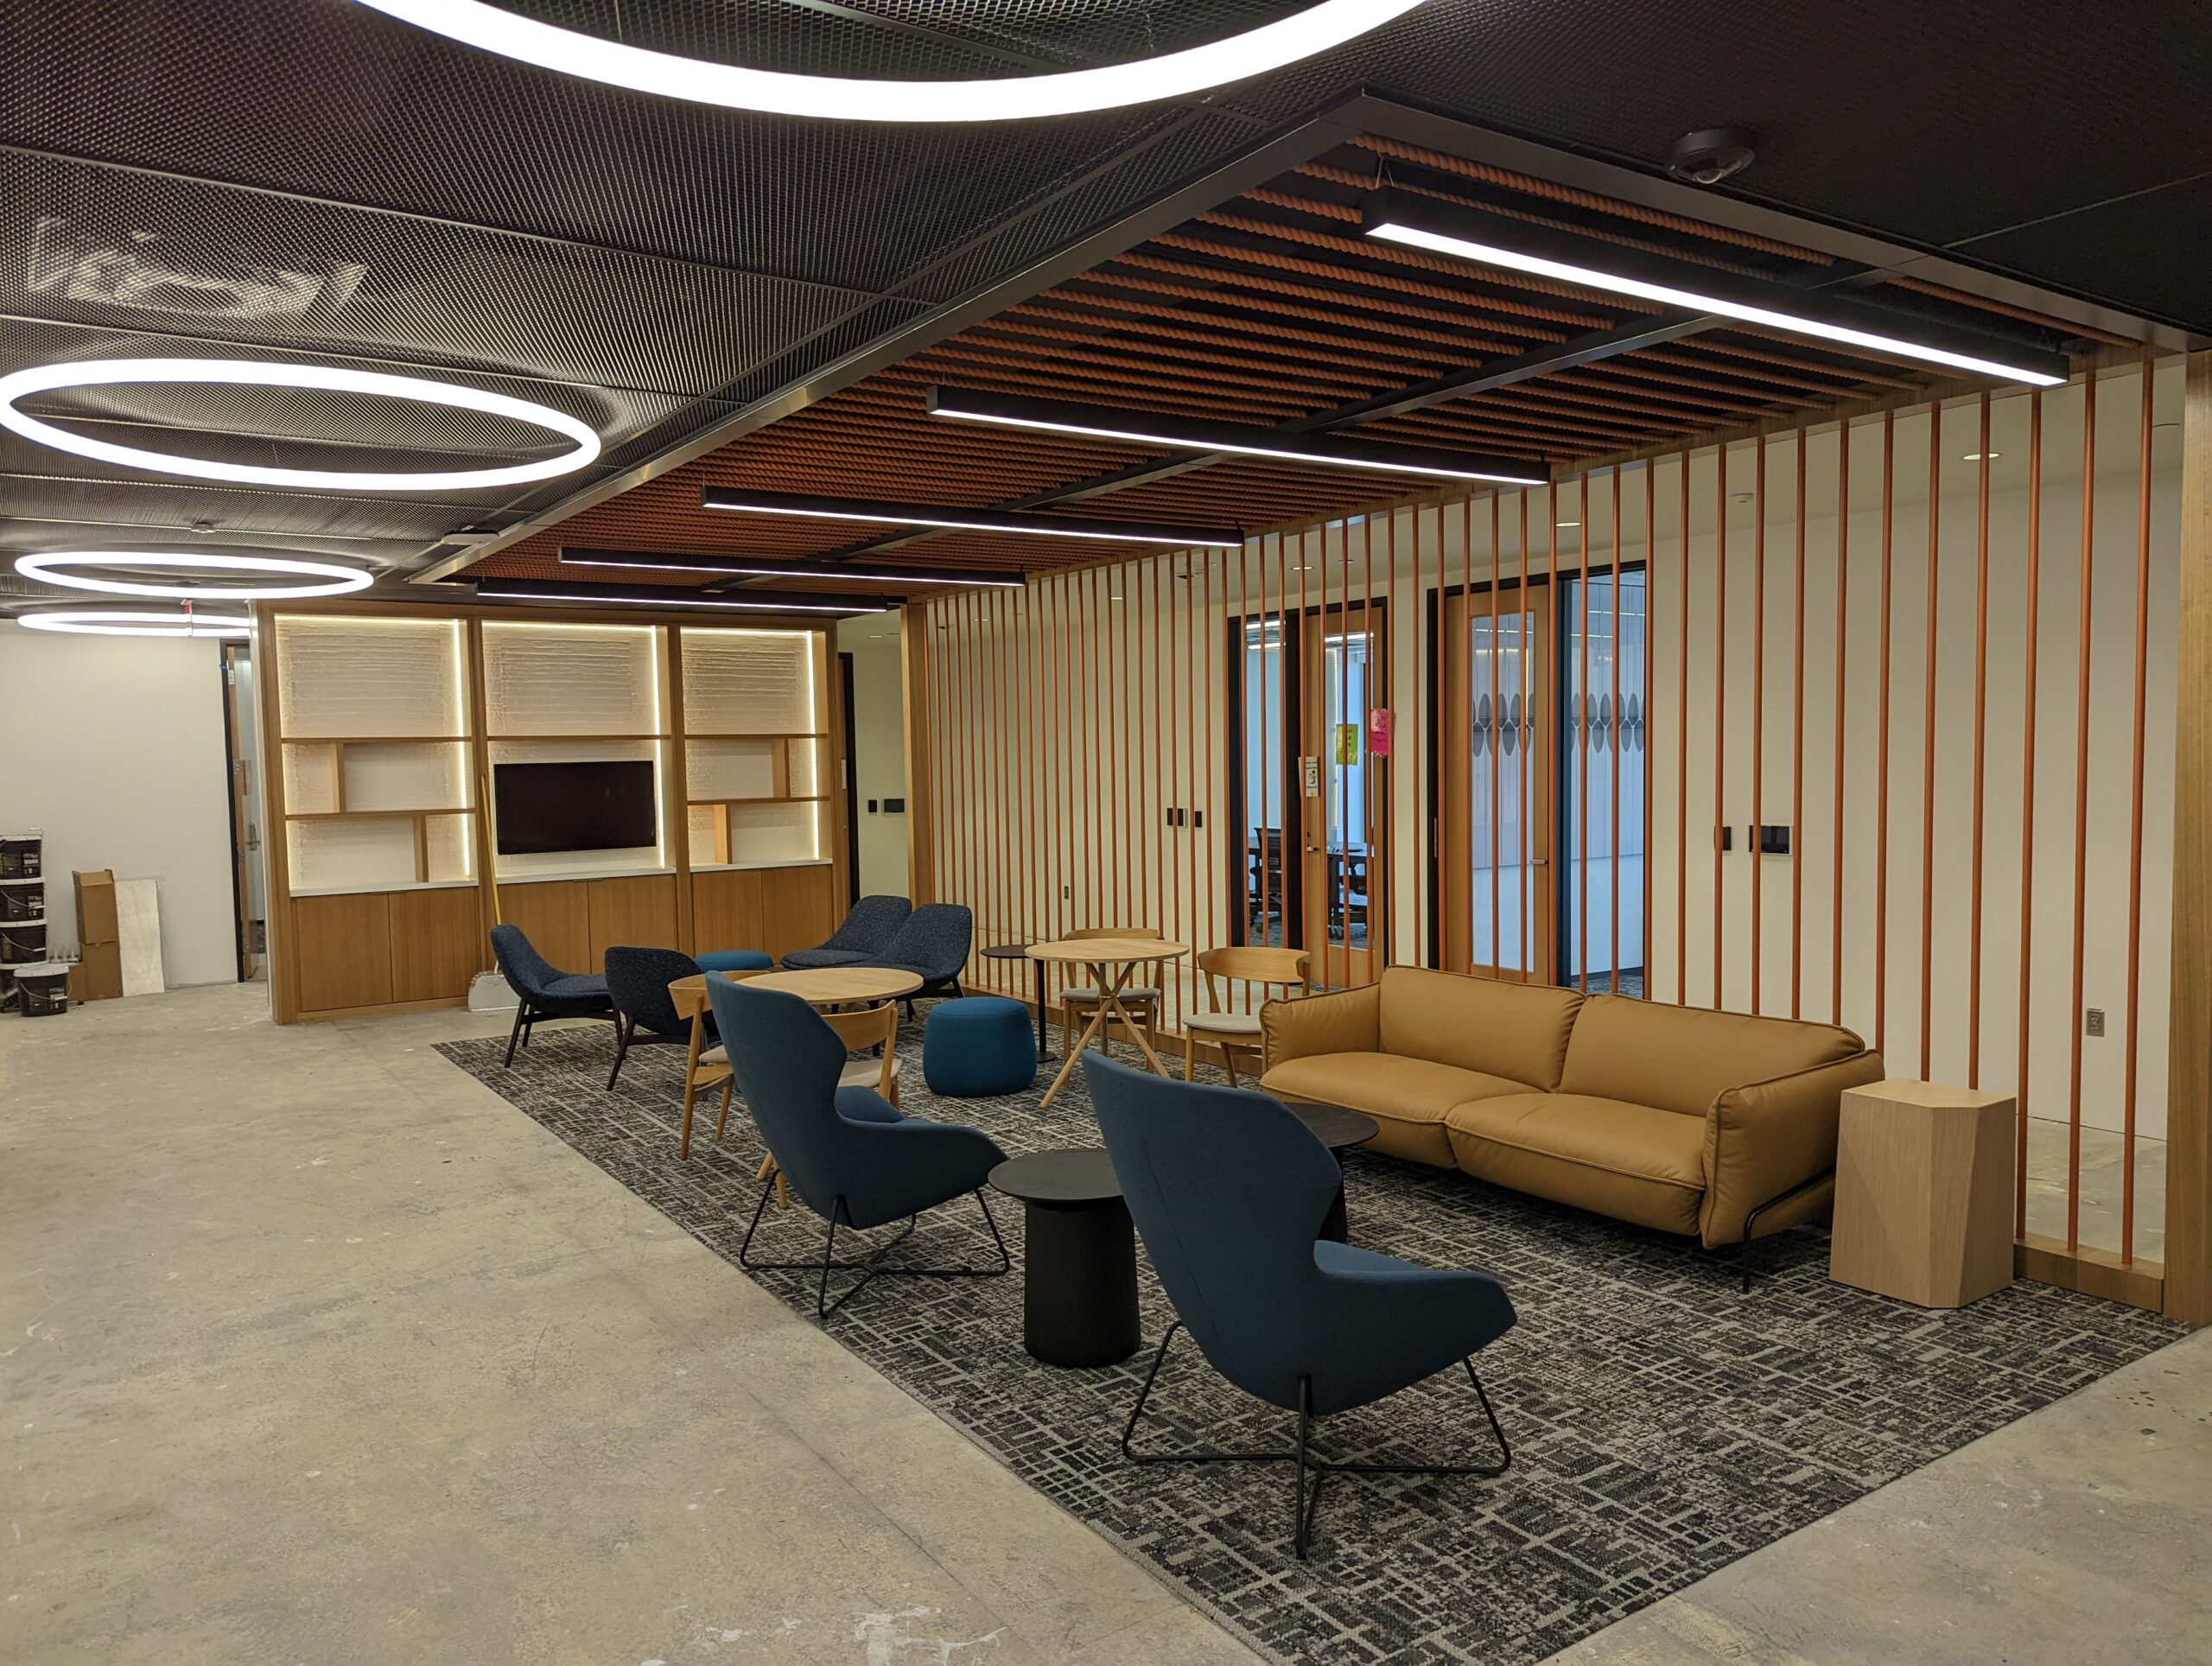 Microsoft Office lobby with blue chairs and tan sofas